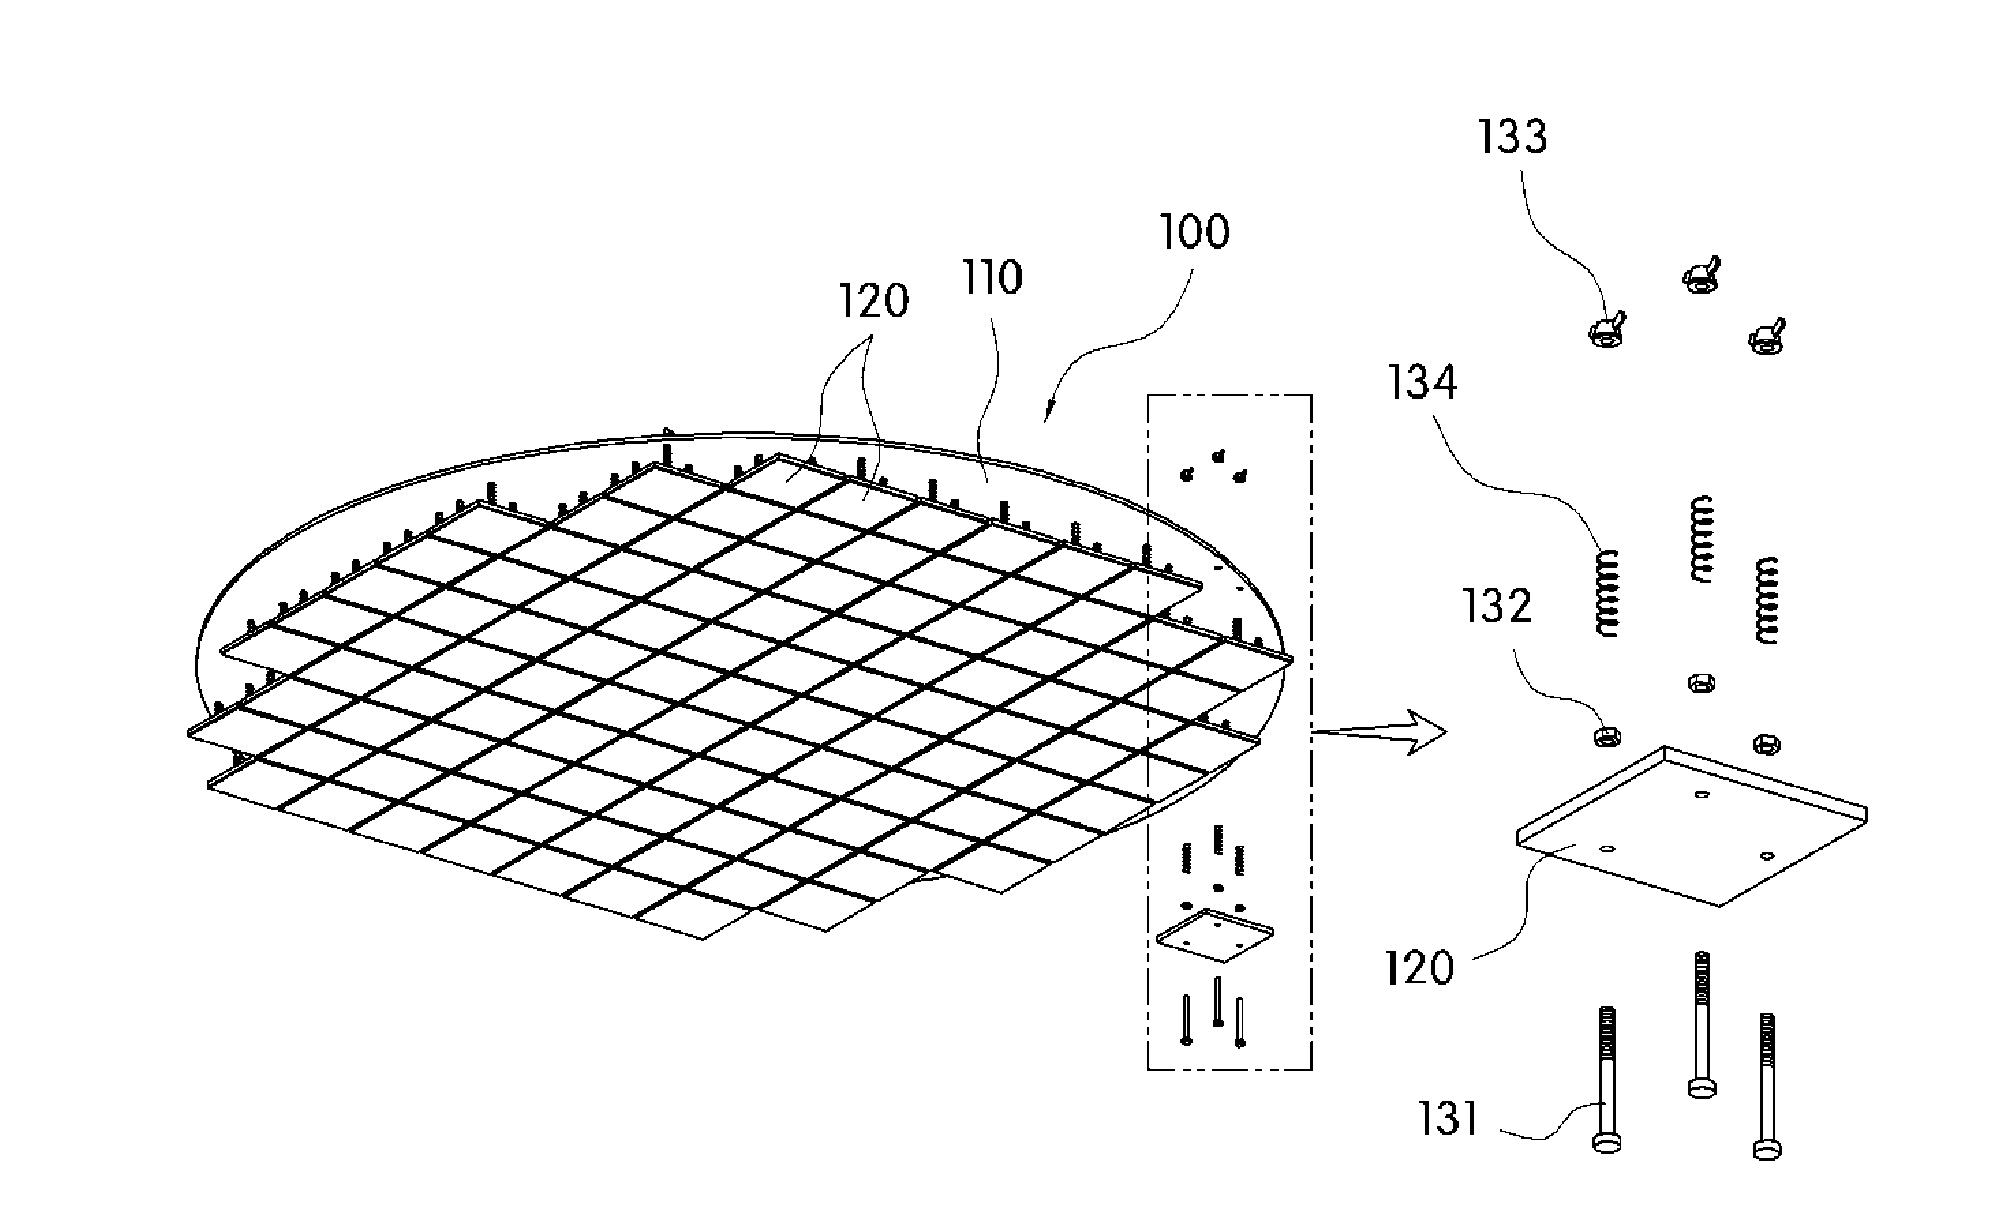 Pixel mirror-type reflection mirror for natural lighting device